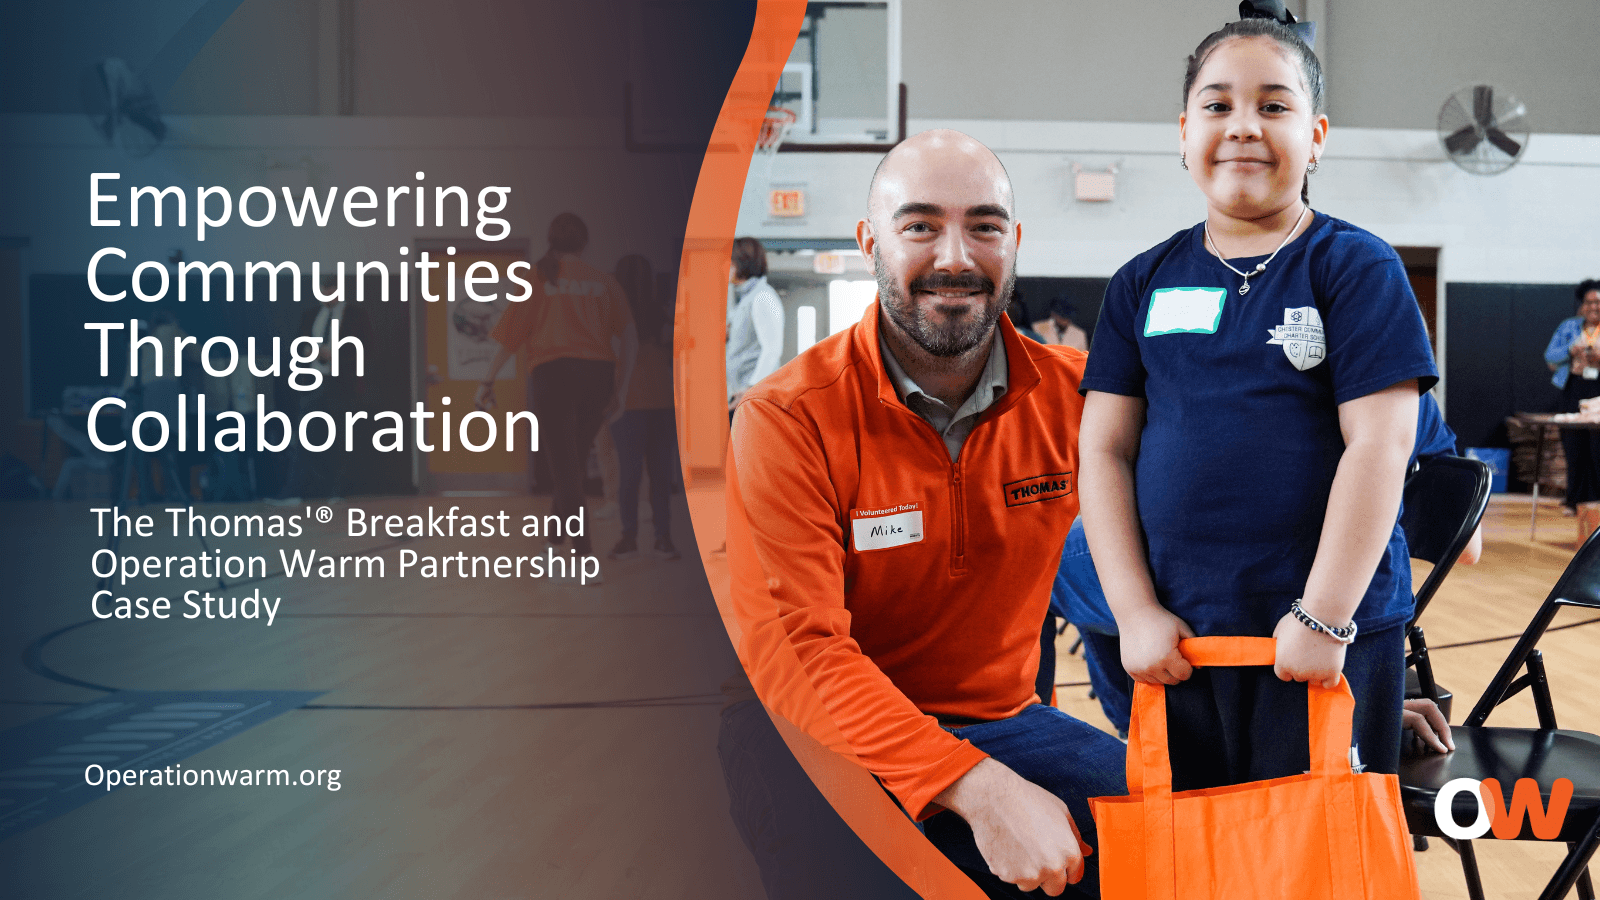 Empowering Communities through Collaboration: The Thomas'® Breakfast and Operation Warm Partnership Case Study